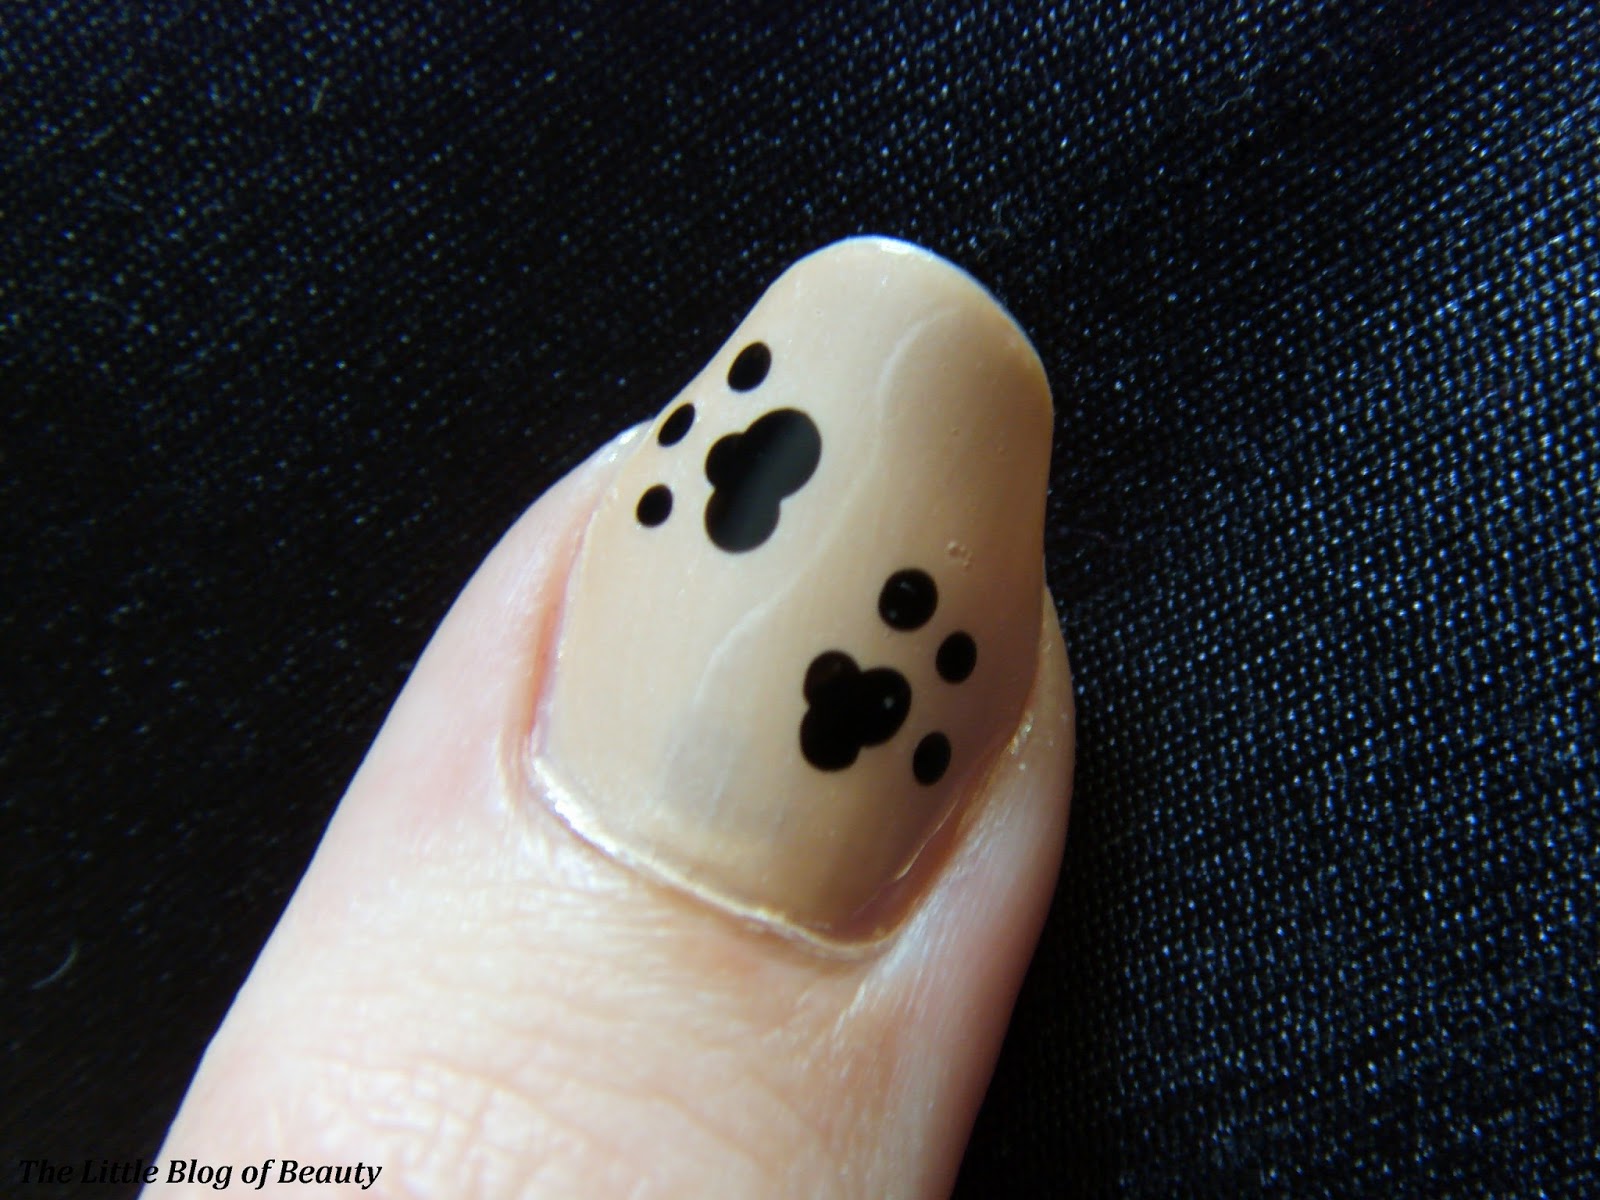 Nail art - Paw prints the sand | The Little Blog of Beauty